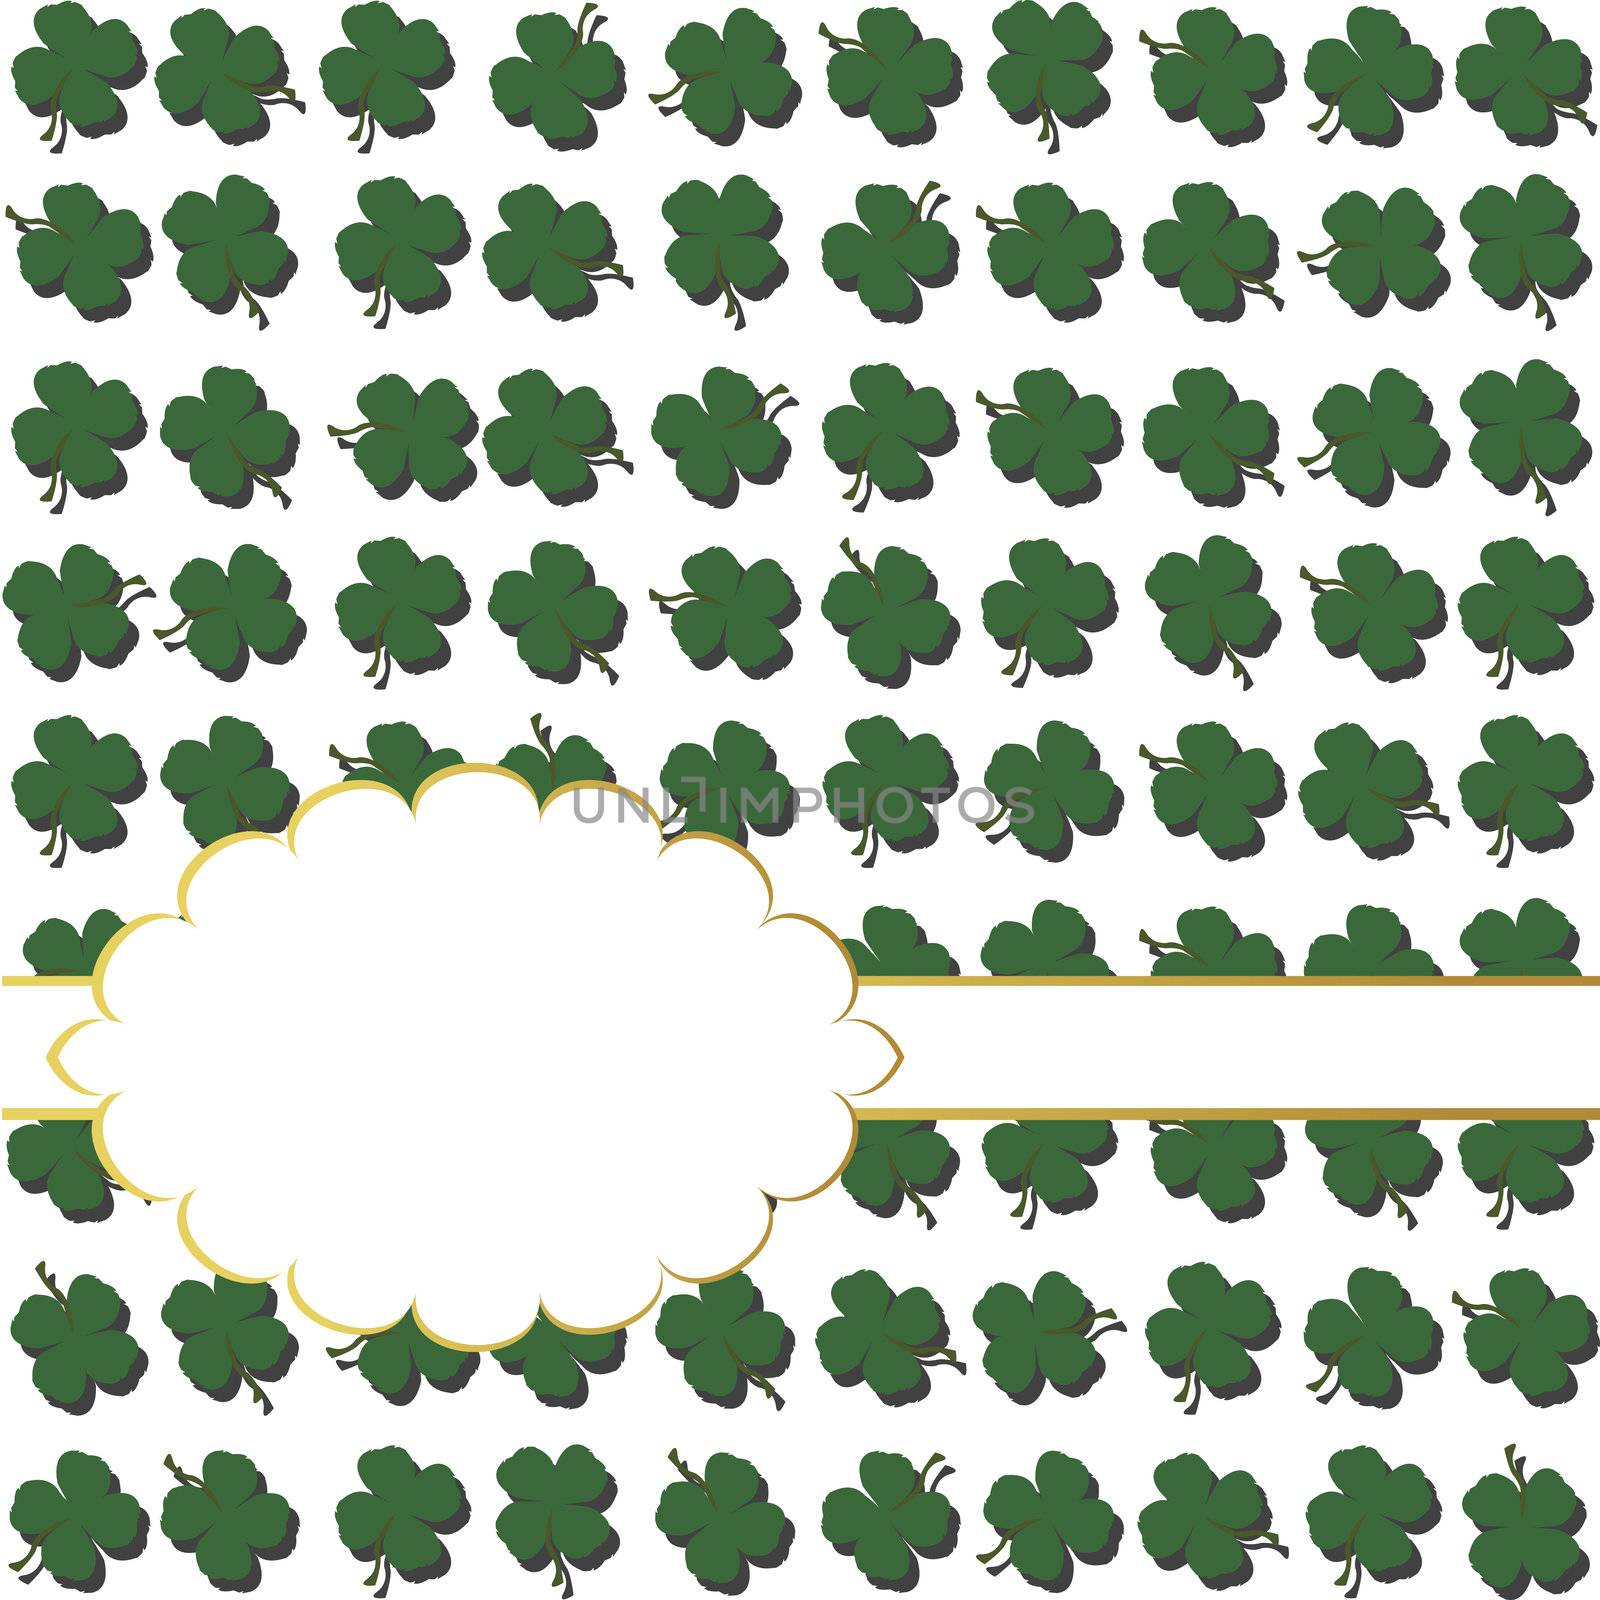 Background with shamrocks and place for text